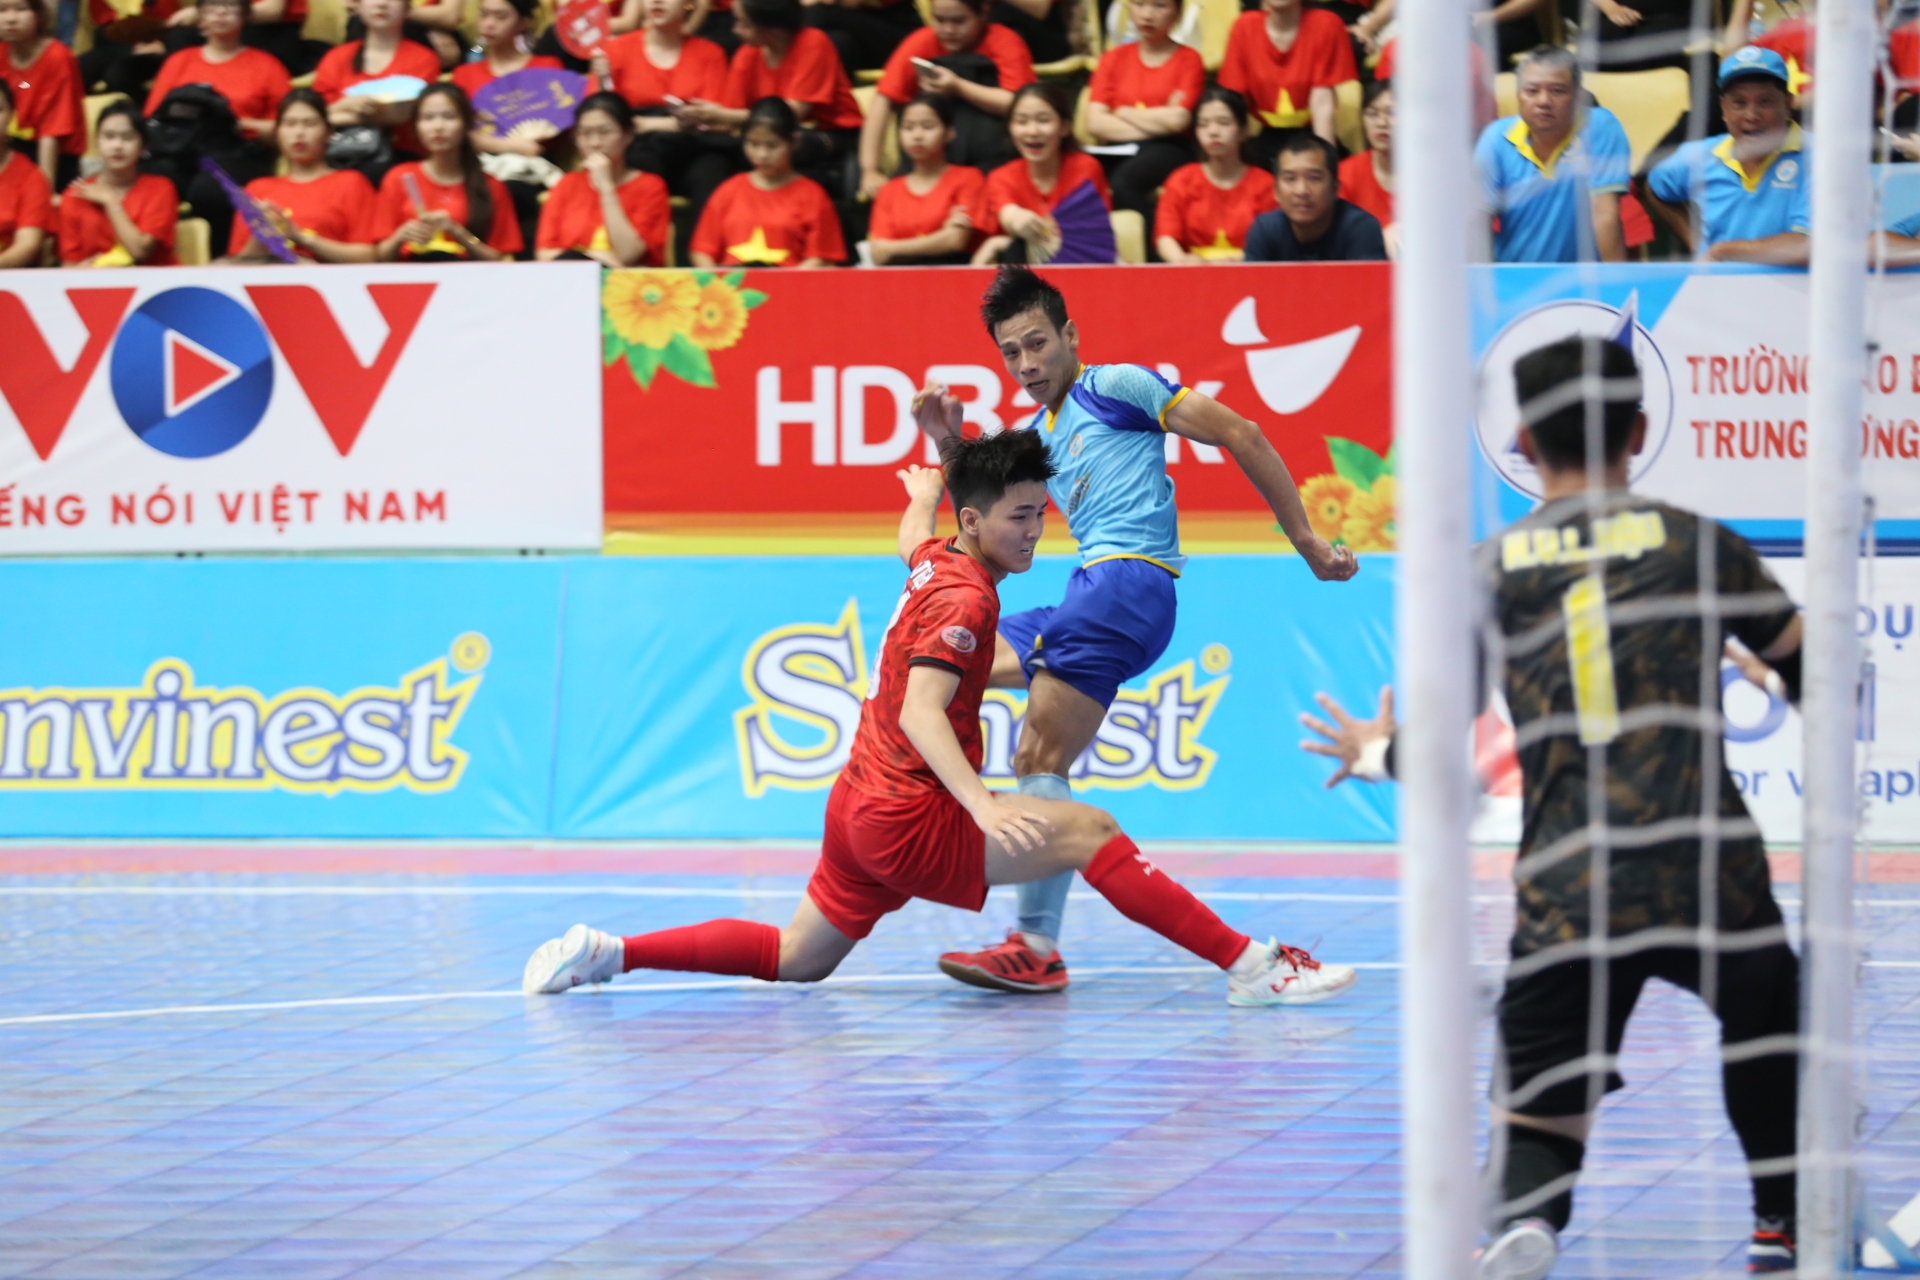 Exciting competition between Sanvinest Khanh Hoa (blue jersey) and Tan Hiep Hung (red jersey)

